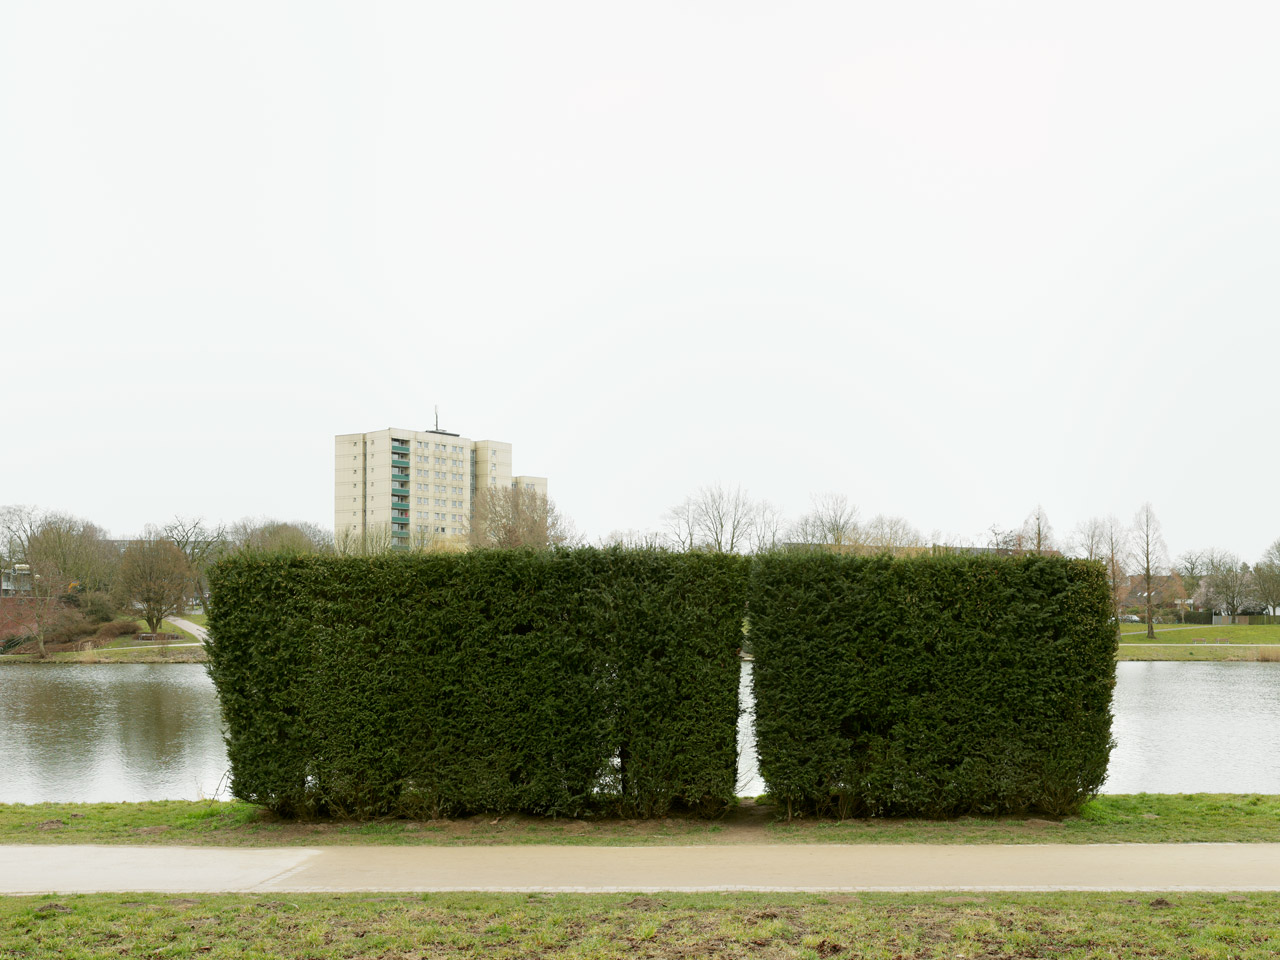 Aasee Muenster, Weniger wild als andere / Less Sauvage than Others, Rosemarie Trockel, 2007